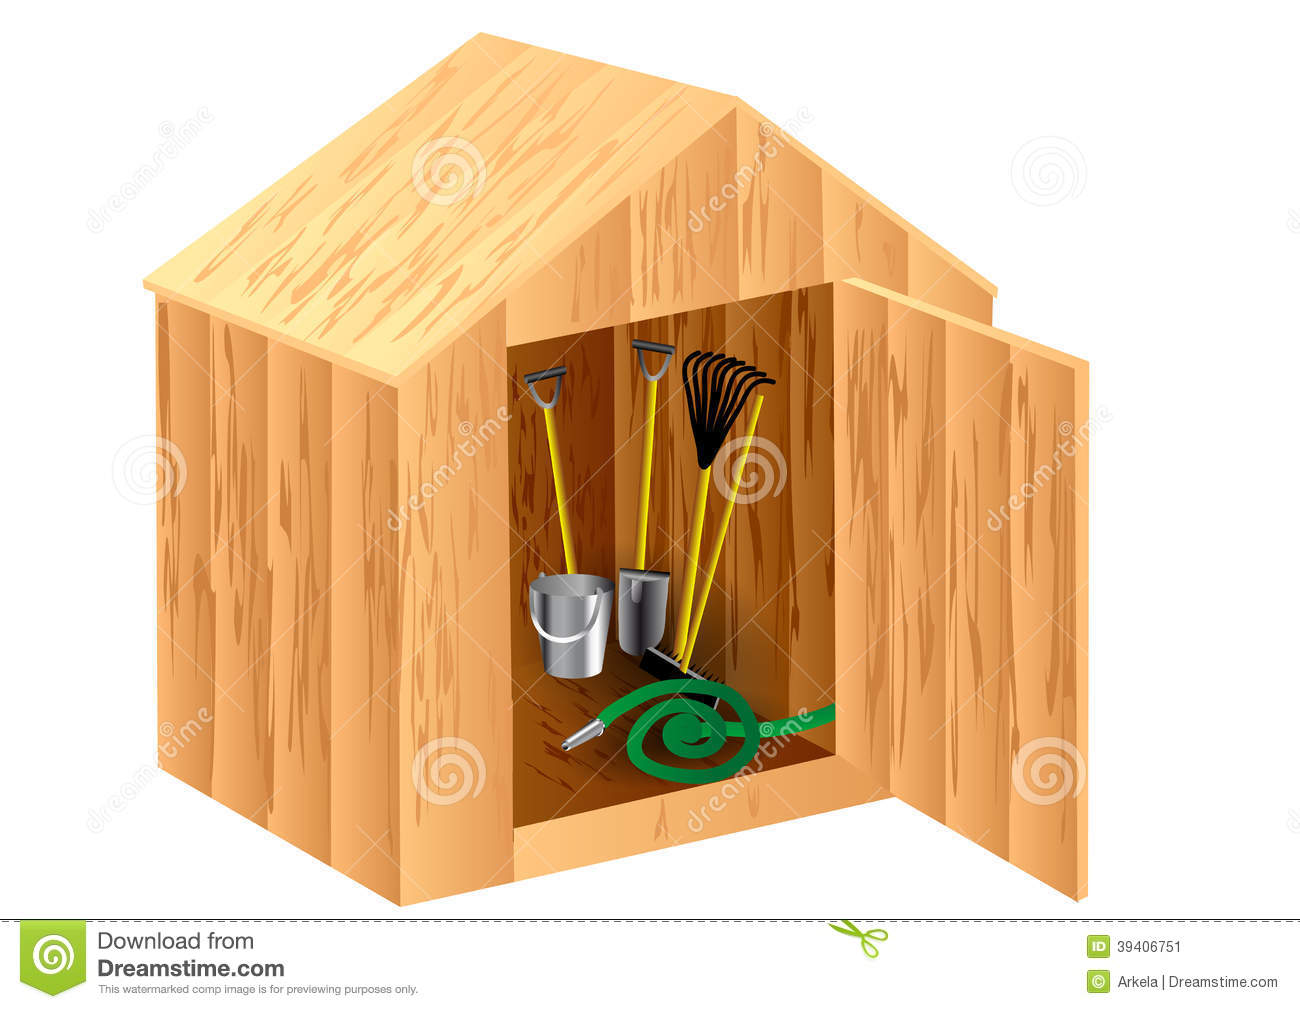 Garden Shed Clipart Garden Shed Stock Image